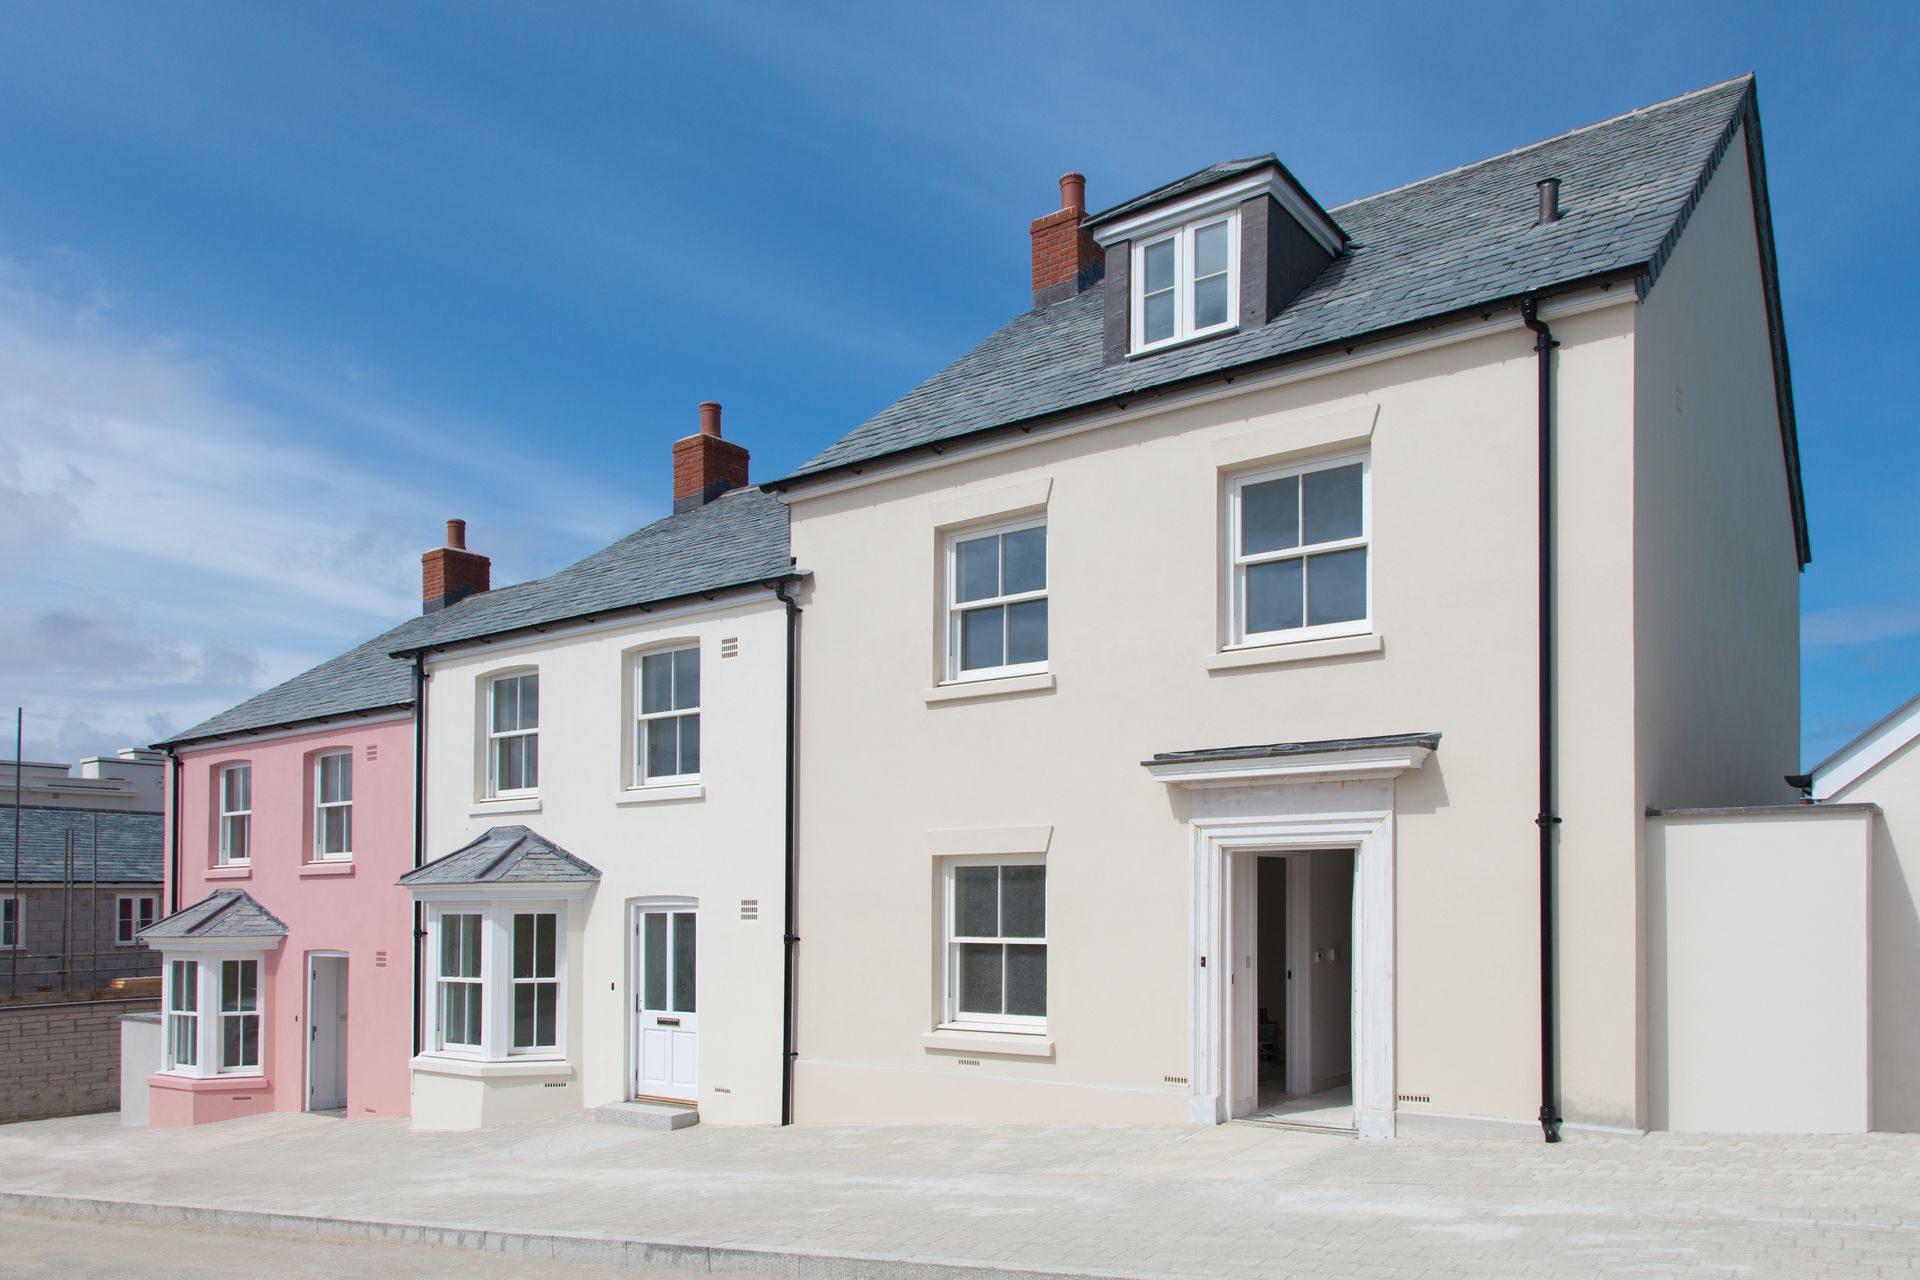 Row of houses with different types of external render colours